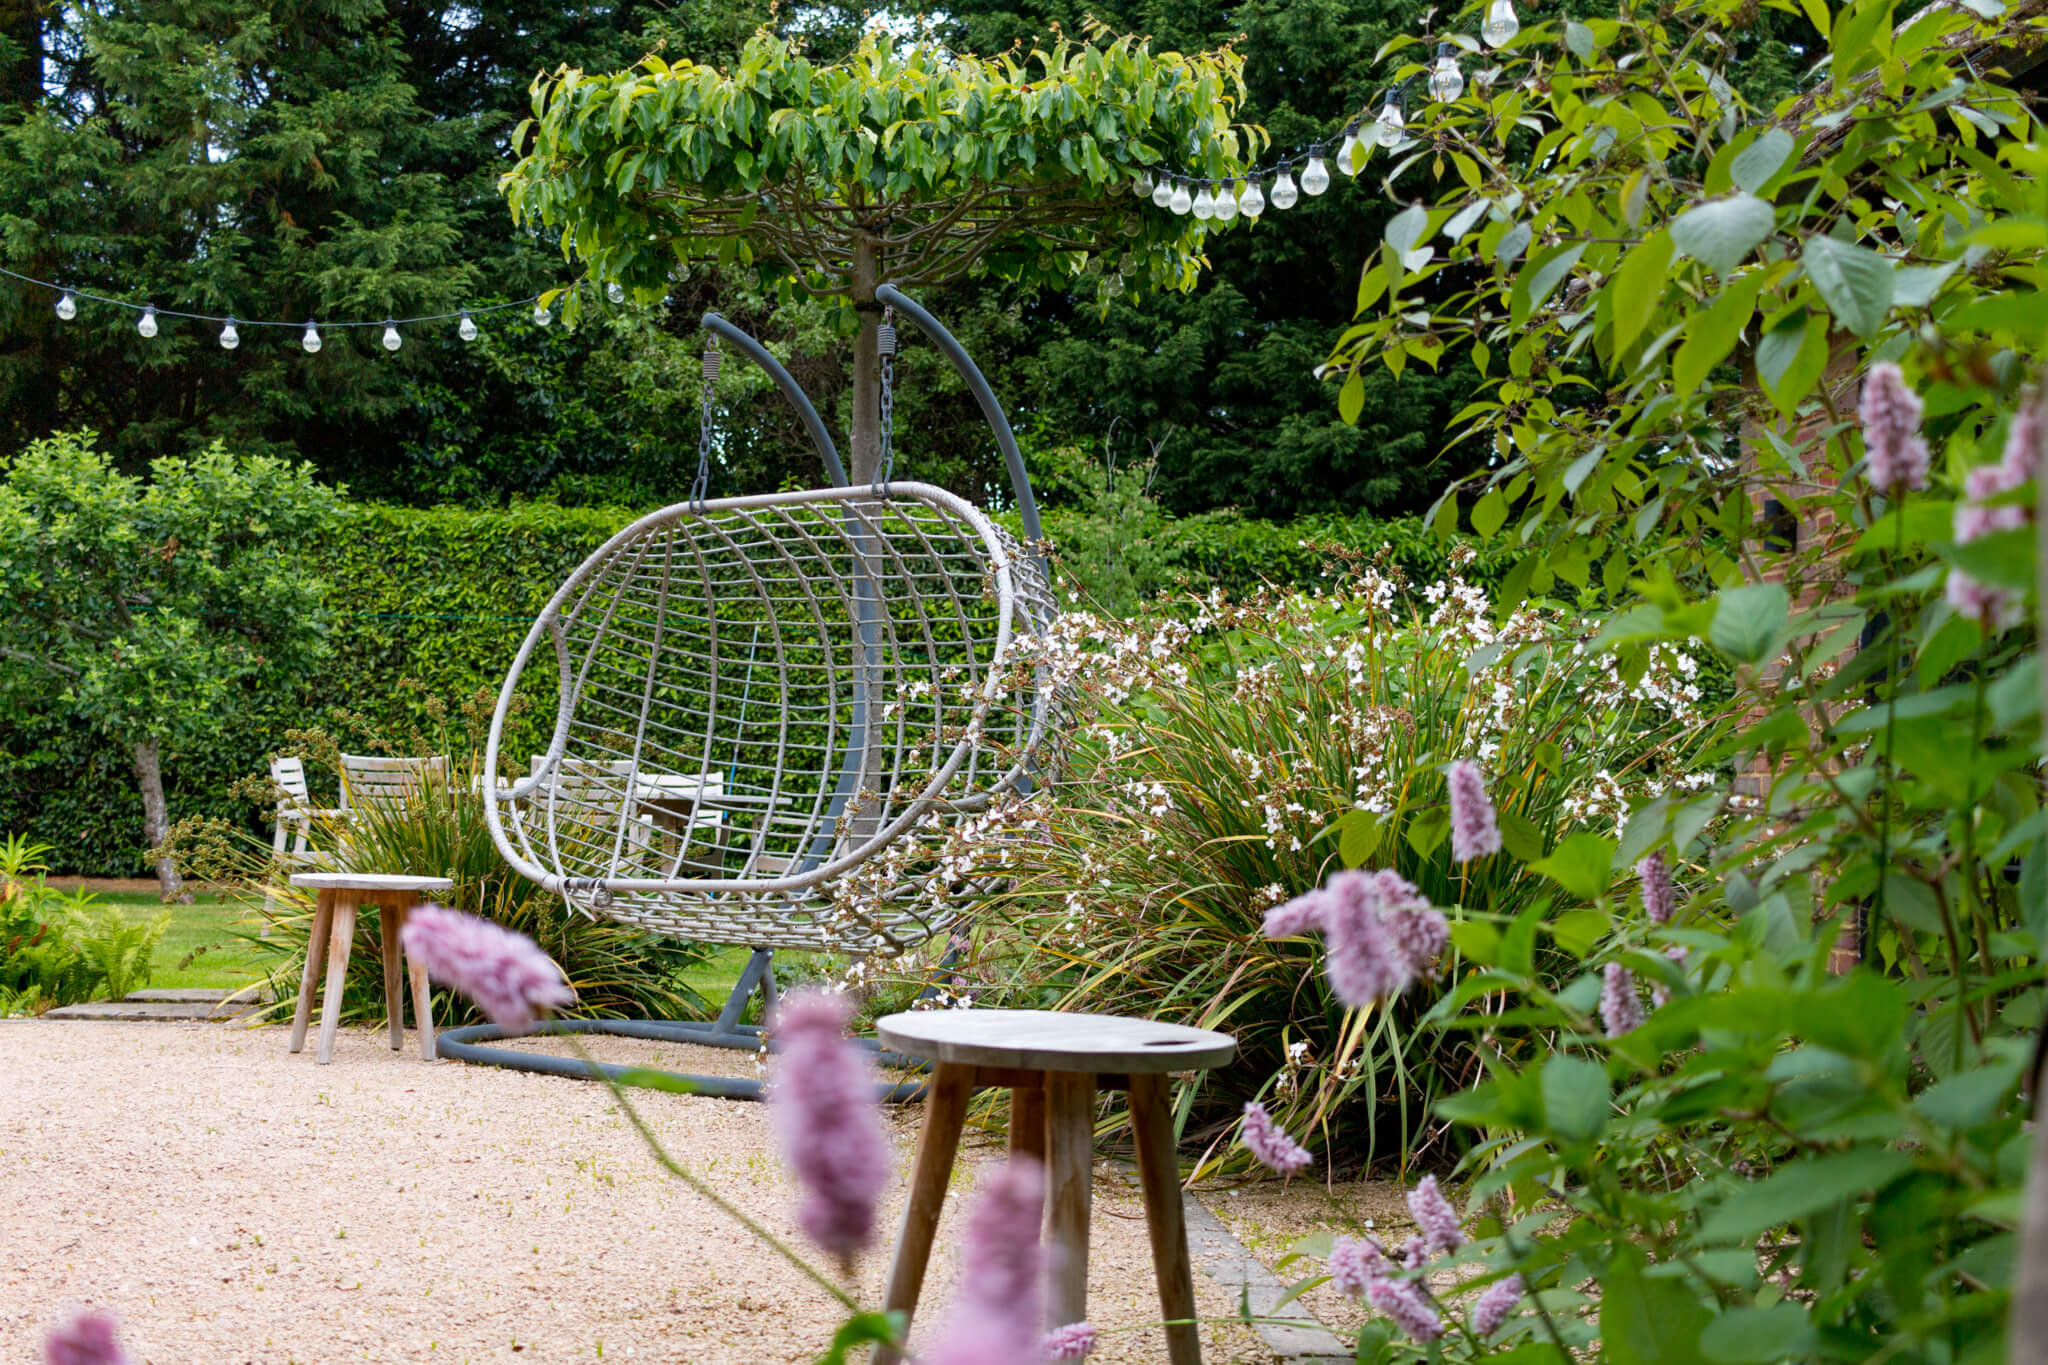 A metal swinging chair on a gravel surface, backdropped by some plants and a large hedge.